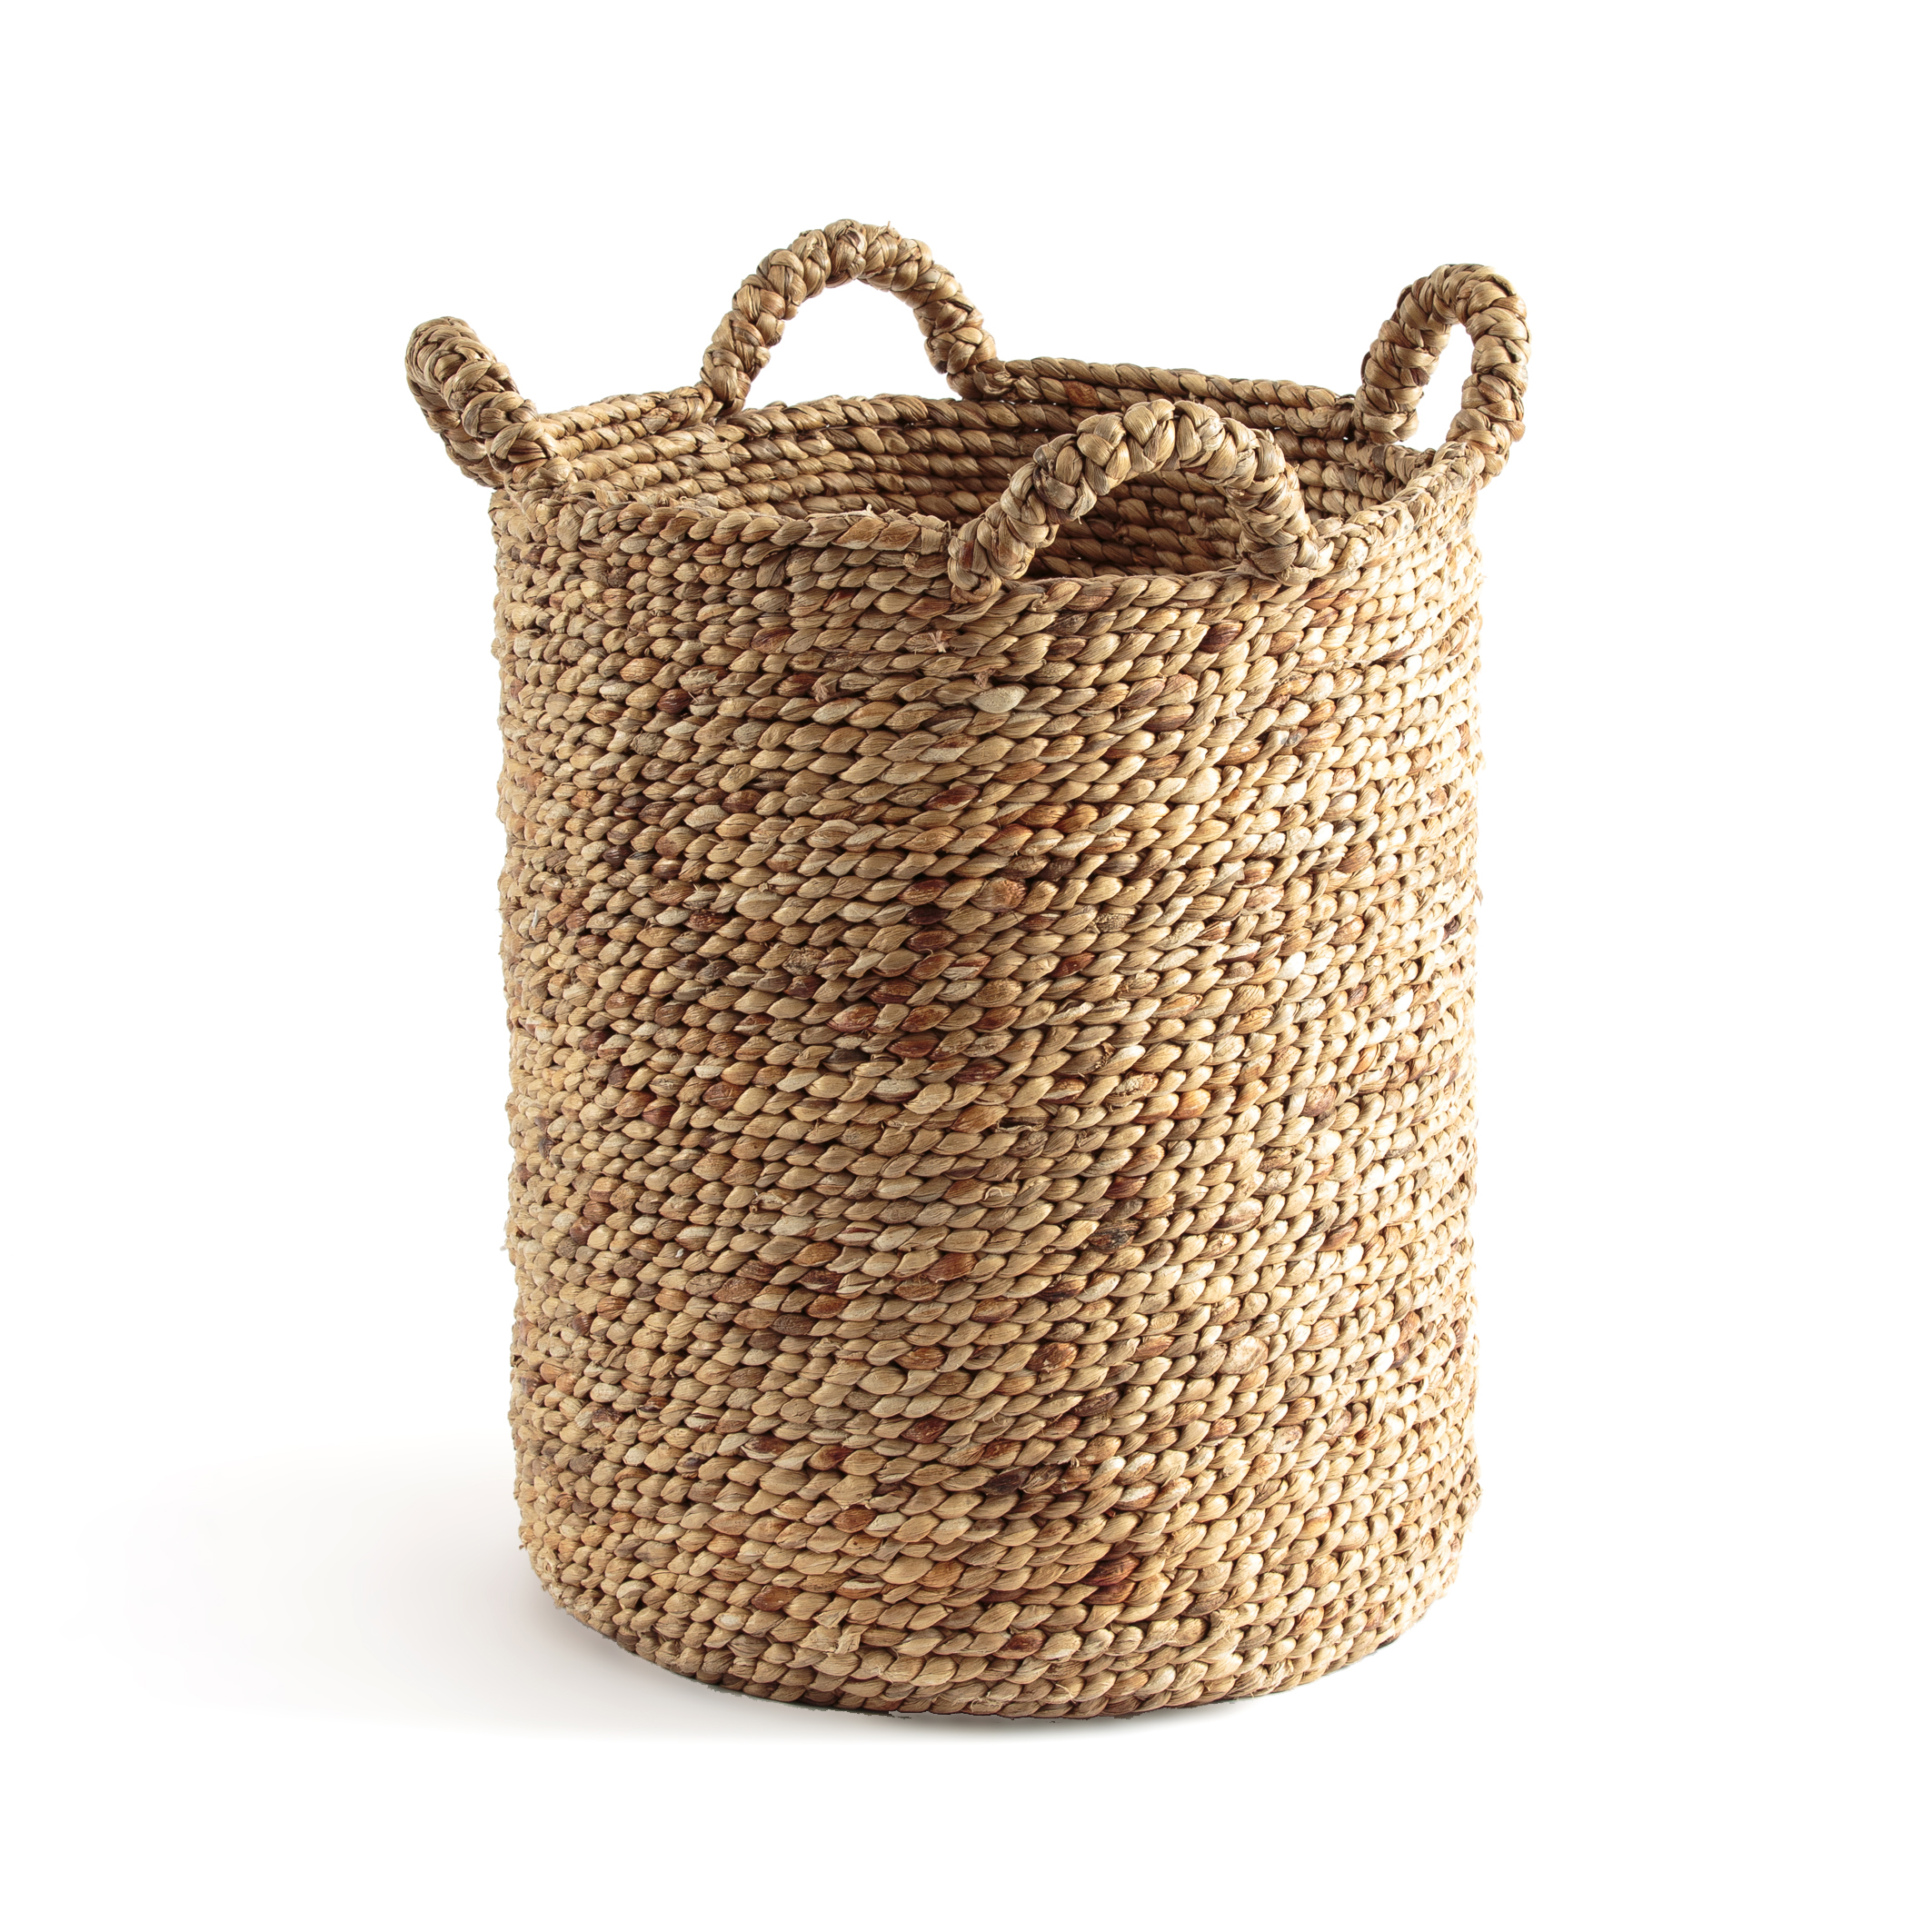 Raga Round Woven Basket Natural Am Pm, Round Woven Basket With Lid